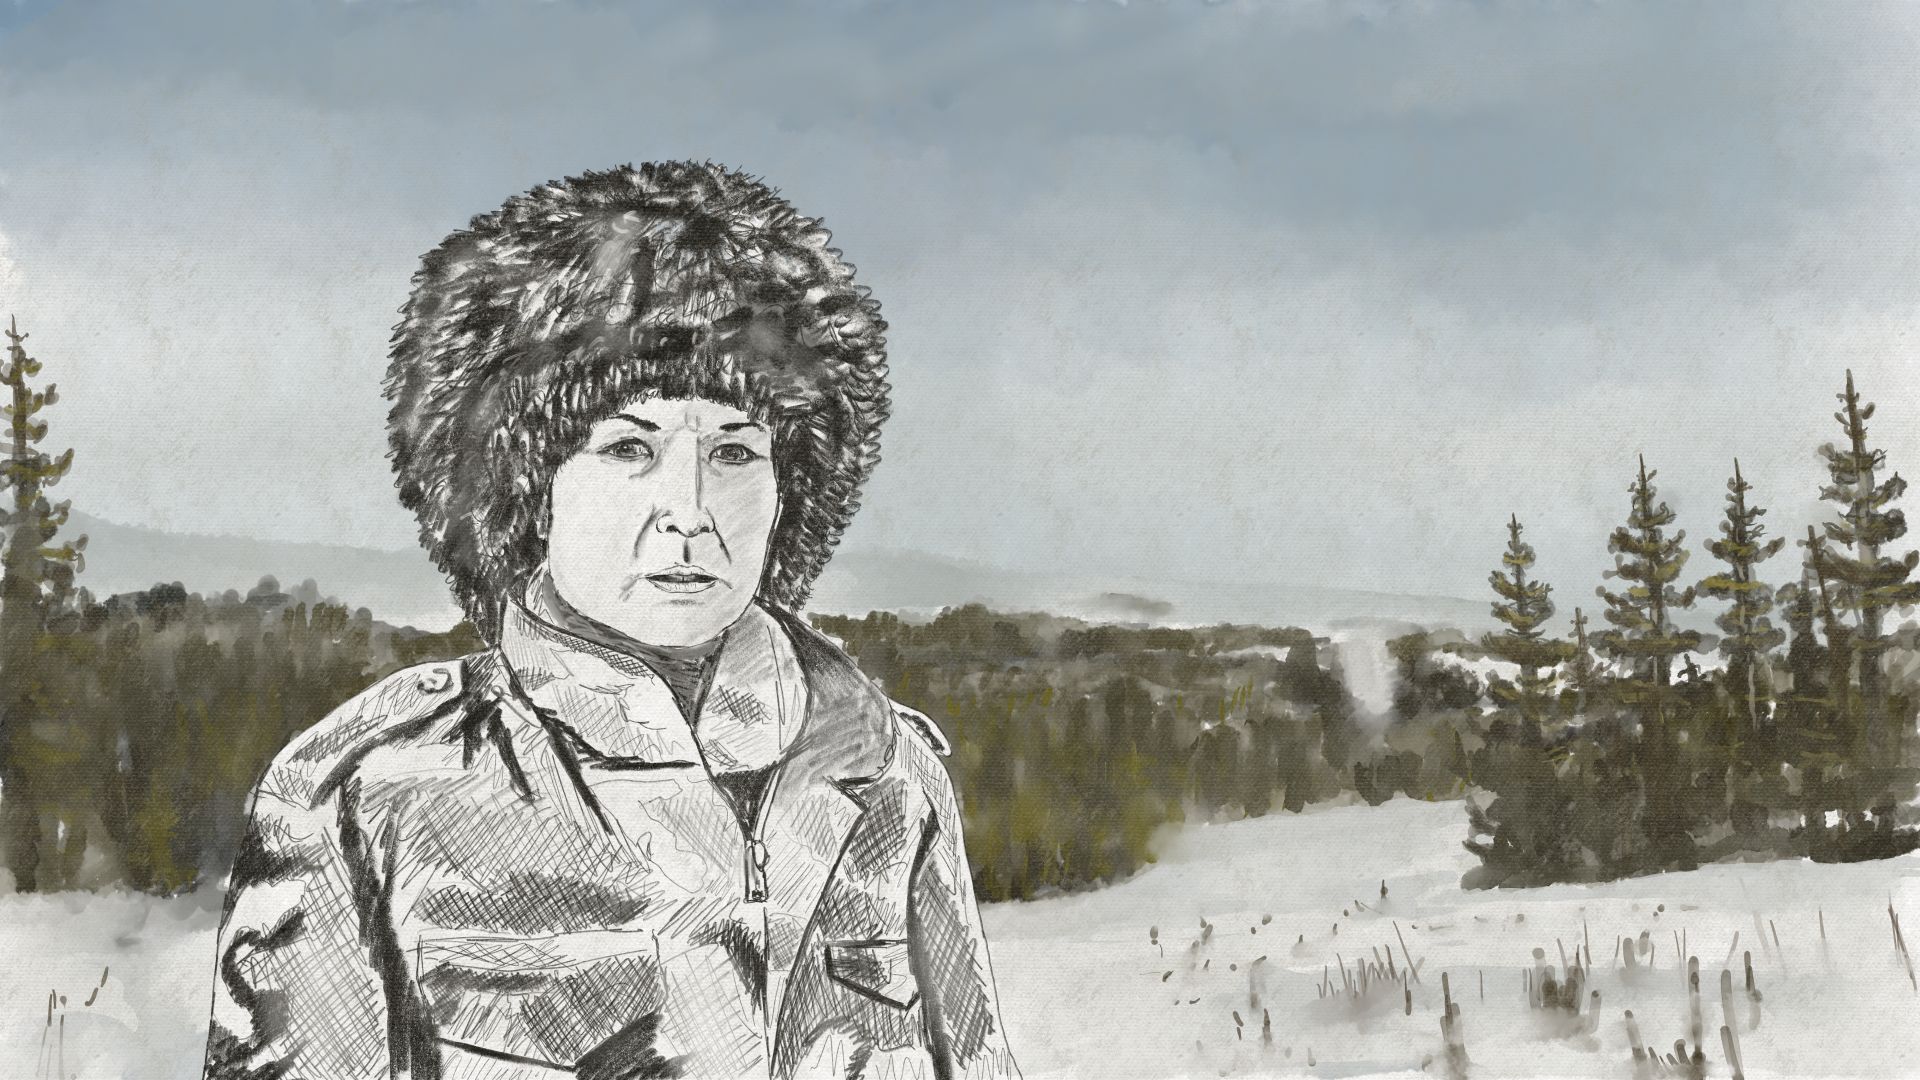 An illustration shows Molly Wickham on Wet'suwet'en land. There is snow on the ground, thick forests behind her and a mountain in the distance.